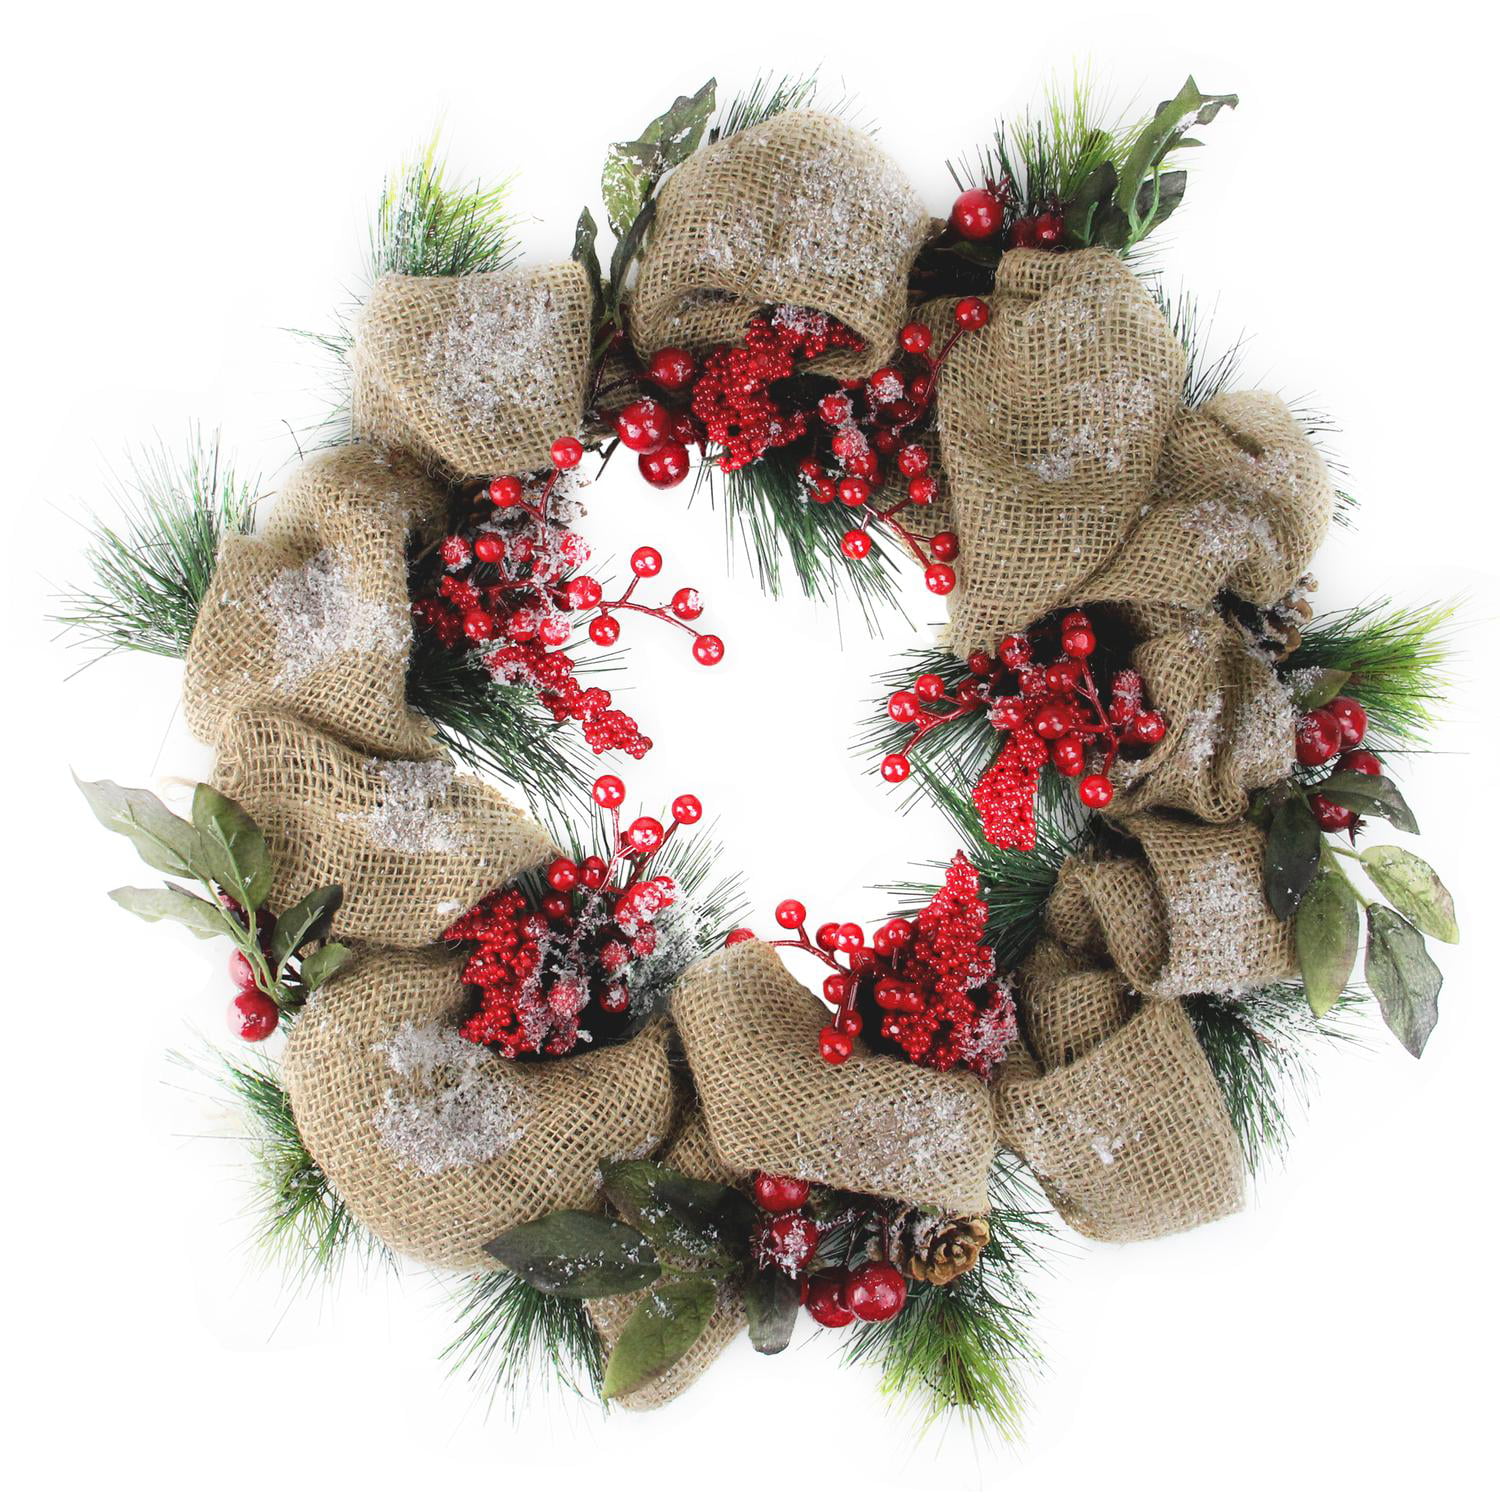 18" Snow Dusted Country Rustic Artificial Christmas Wreath with and Pine Cones - Unlit - Walmart.com